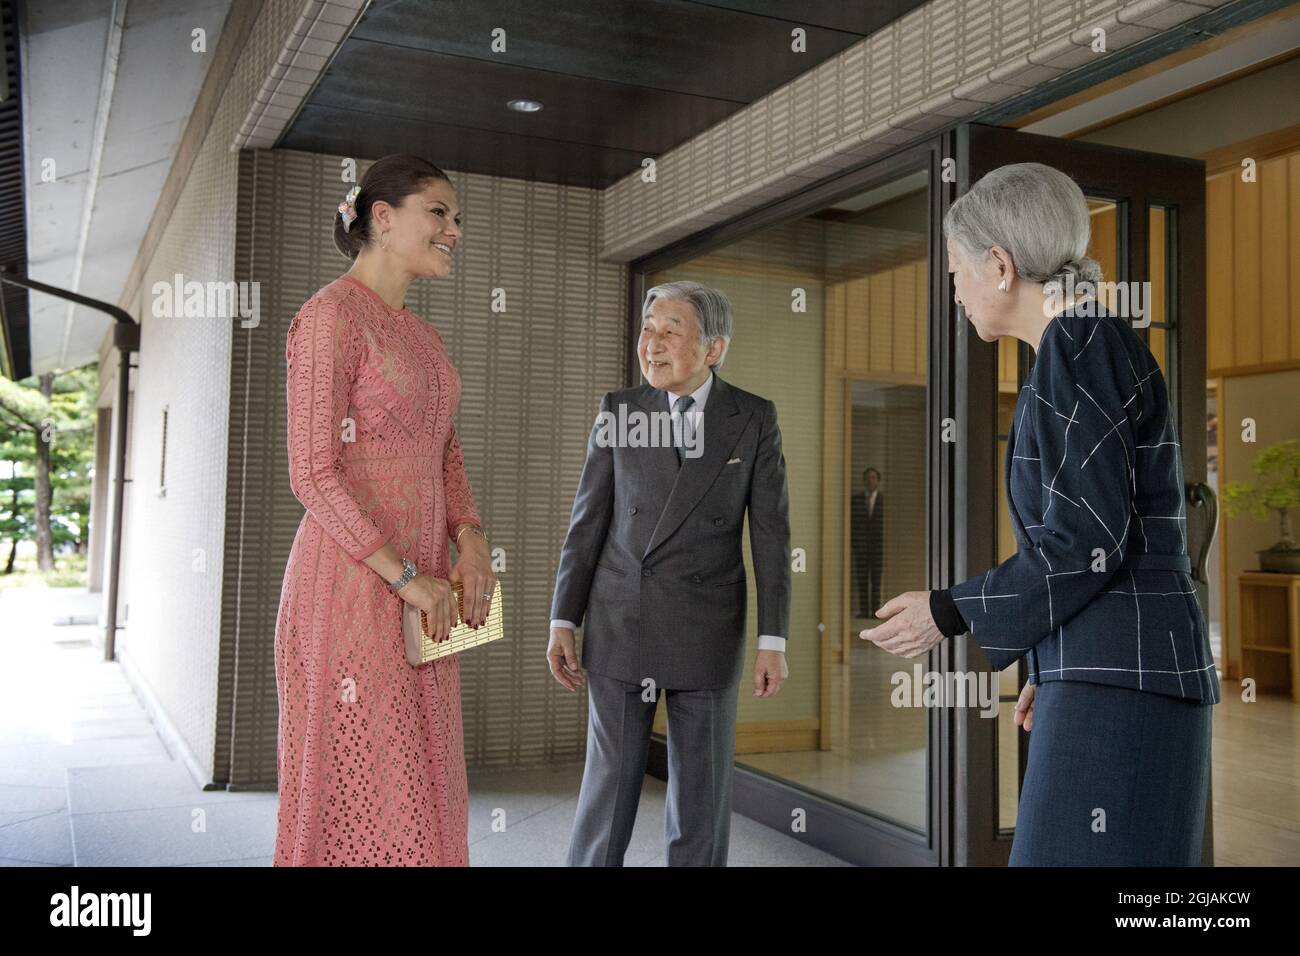 TOKYO 20170418 Crown Princess Victoria is seen with the Emperor of Japan Akihito and Empress Michiko av Japan in Tokyyo on Tuesday. The Crown Princess is on a offcial visit to Japan. Foto: Jessica Gow / TT / Kod 10070  Stock Photo